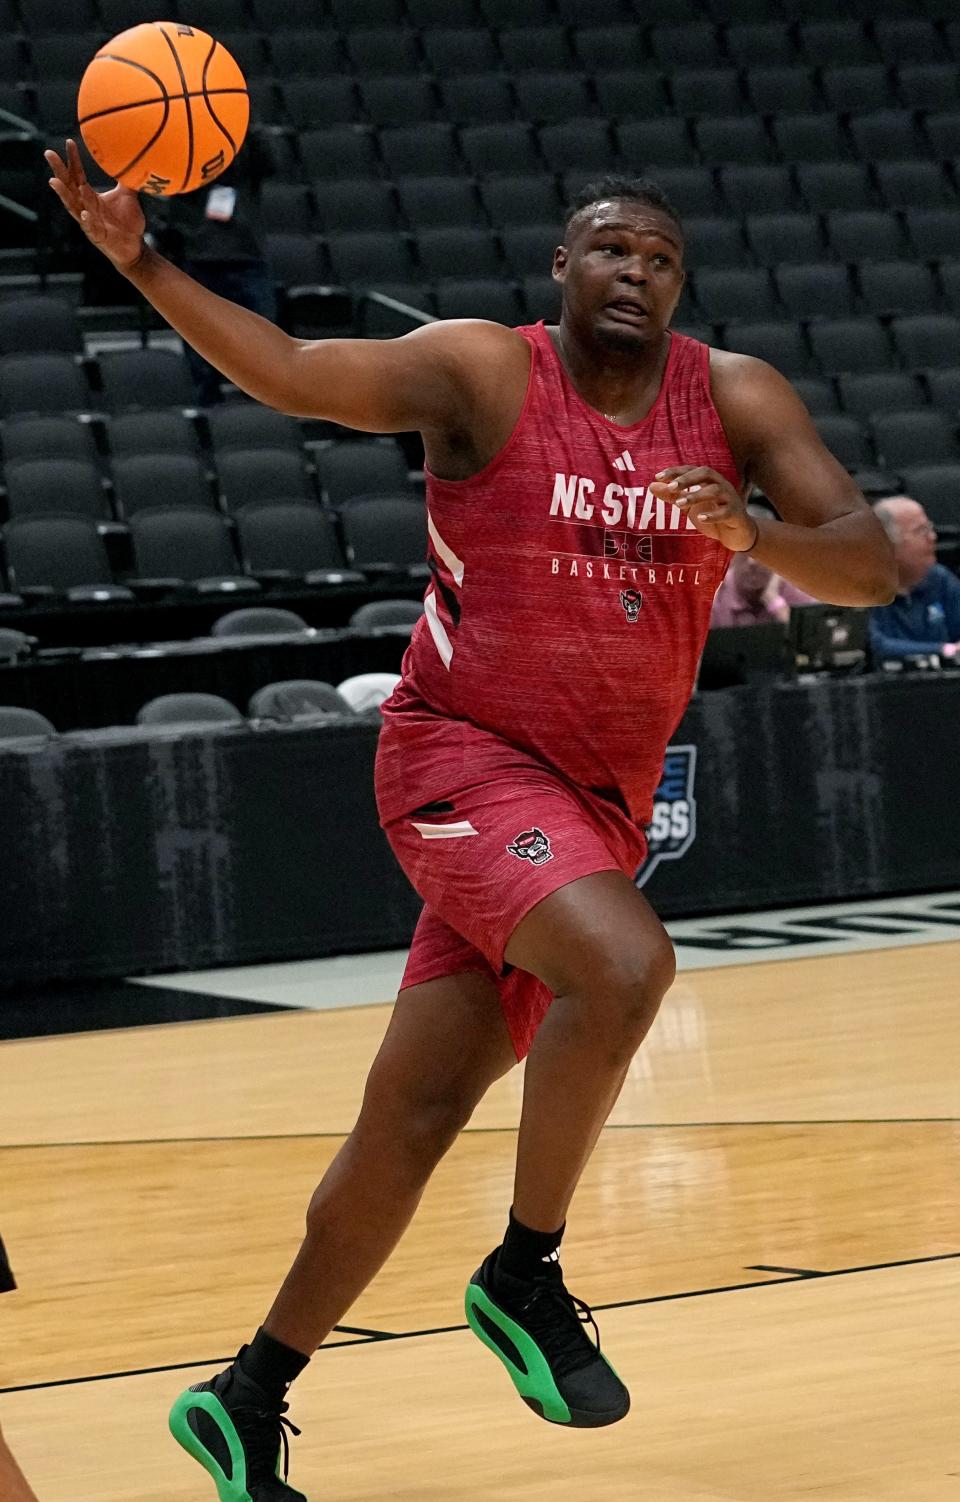 North Carolina State forward DJ Burns Jr. is shown during practice for their NCAA Tournament South Regional game Thursday at American Airlines Arena in Dallas.